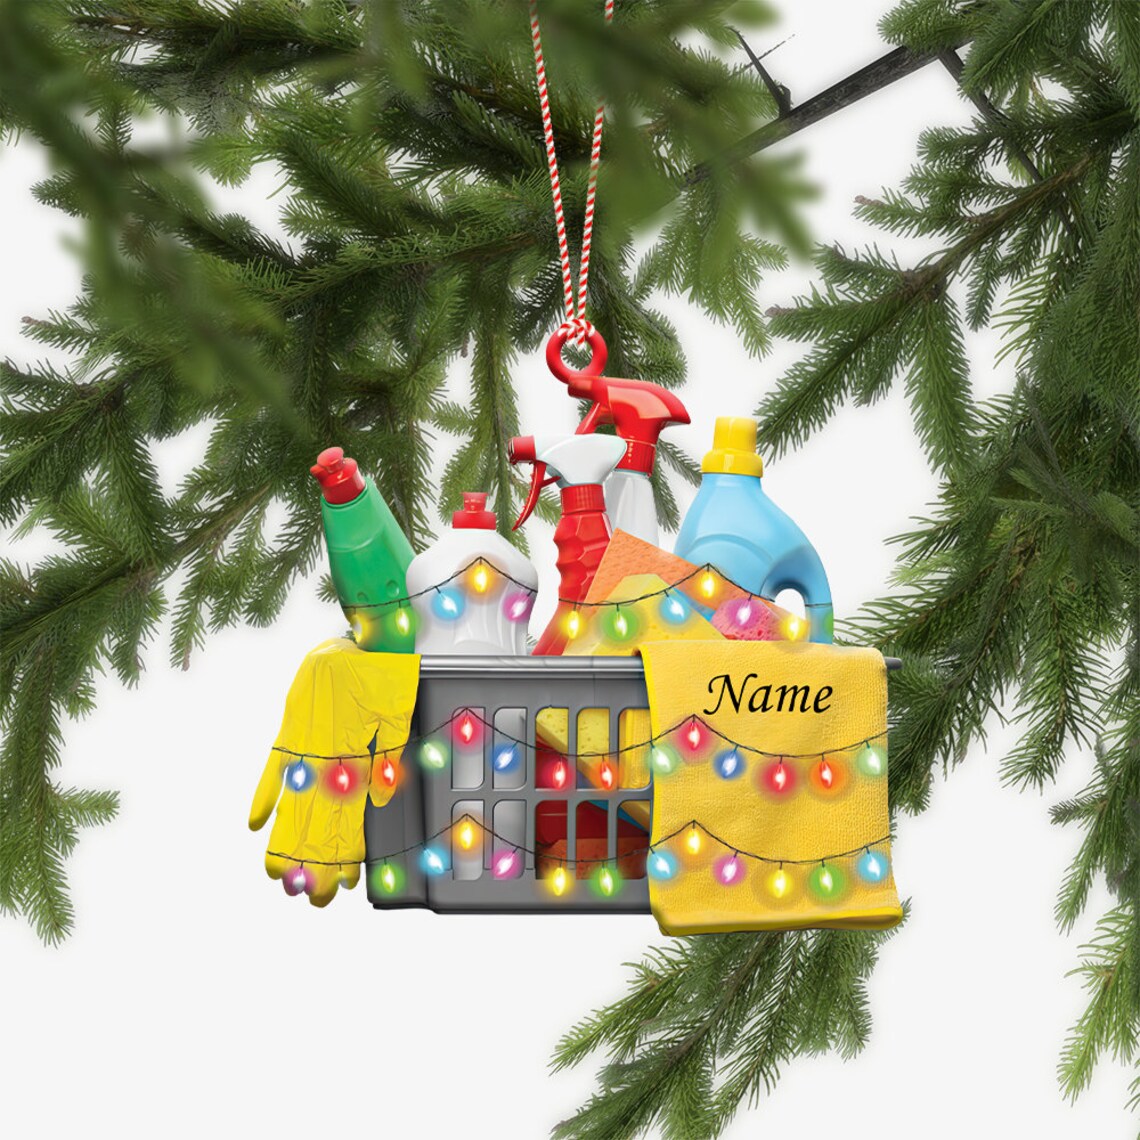 Personalized Housekeeping Ornament/ Cleaning Service Christmas Ornament/ Housekeeper Ornament/ Janitor Cleaning Lady Ornament